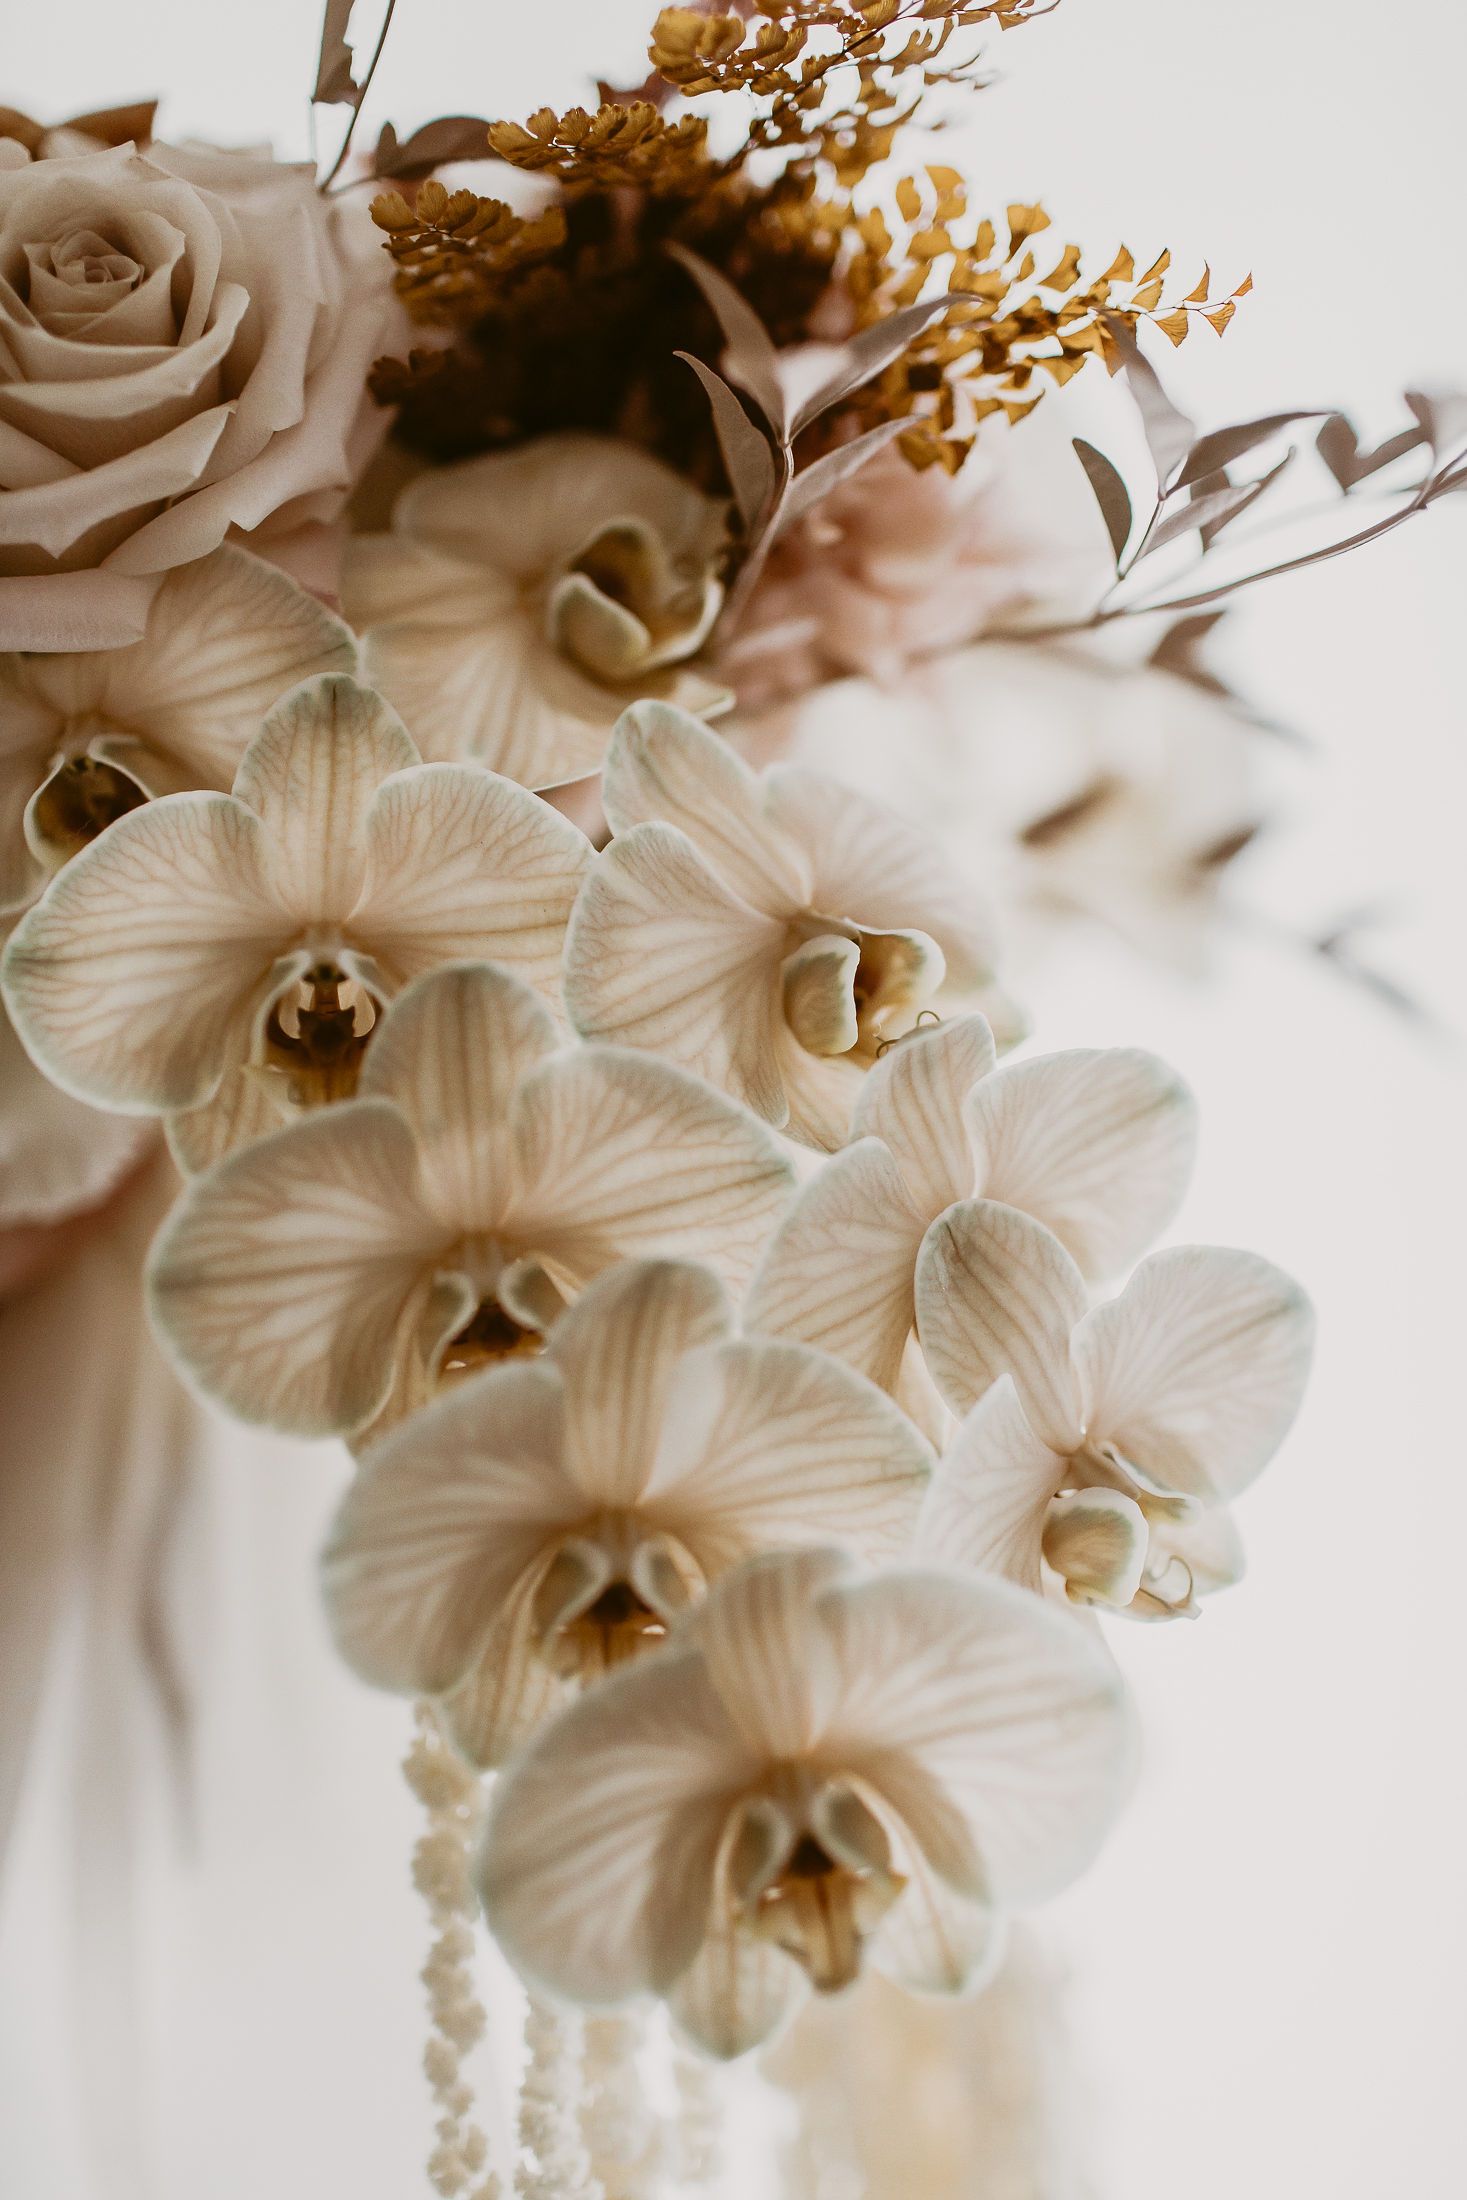 A bouquet of flowers with pearls and beads - Wedding